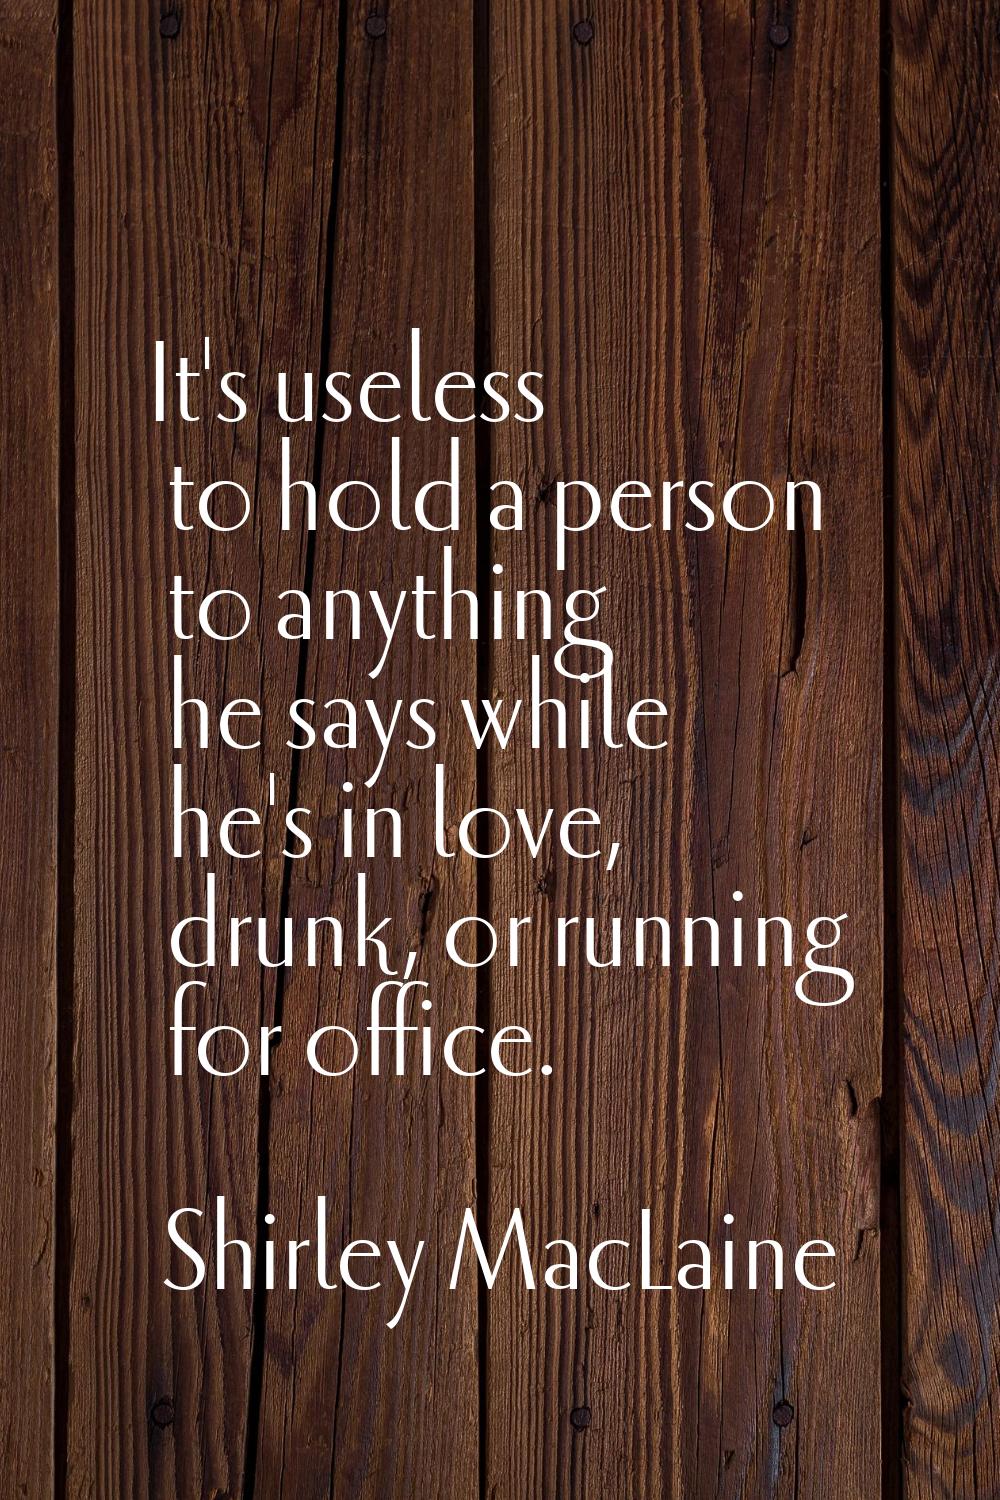 It's useless to hold a person to anything he says while he's in love, drunk, or running for office.